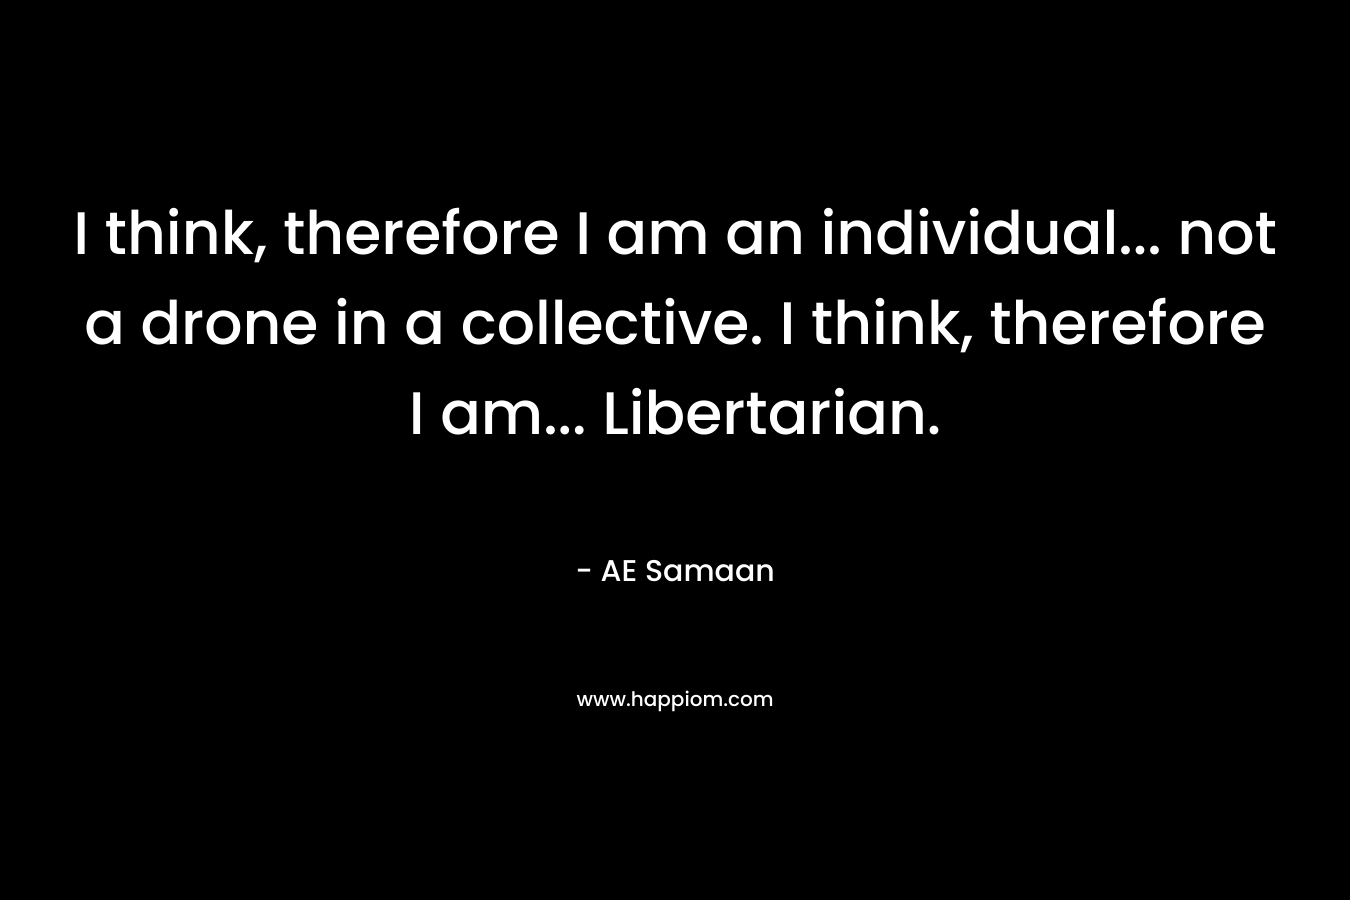 I think, therefore I am an individual... not a drone in a collective. I think, therefore I am... Libertarian.